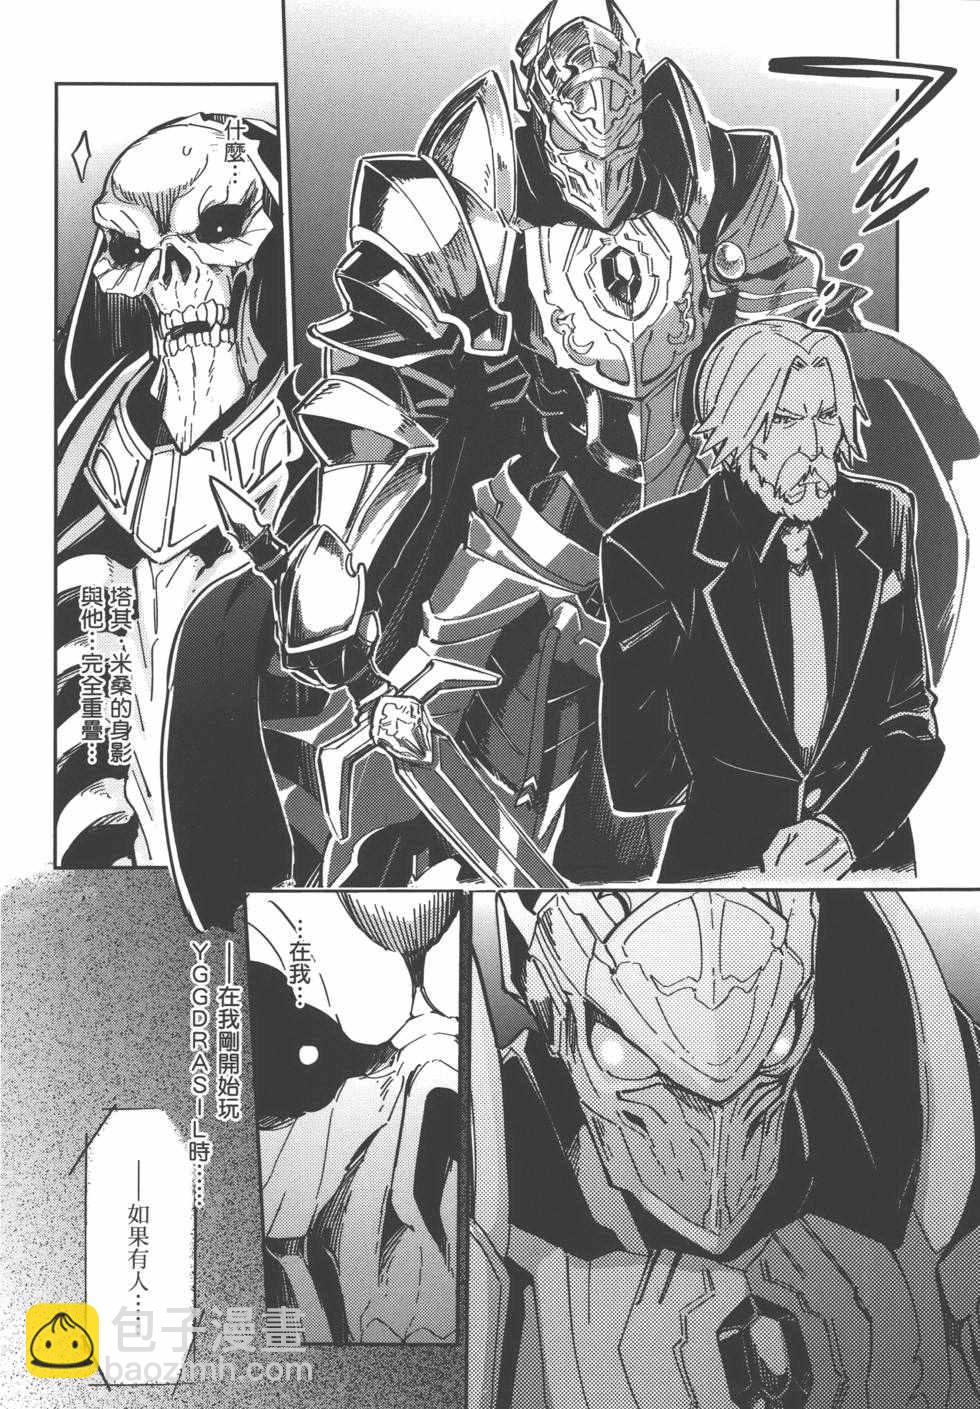 OVERLORD - 第1卷(2/4) - 4